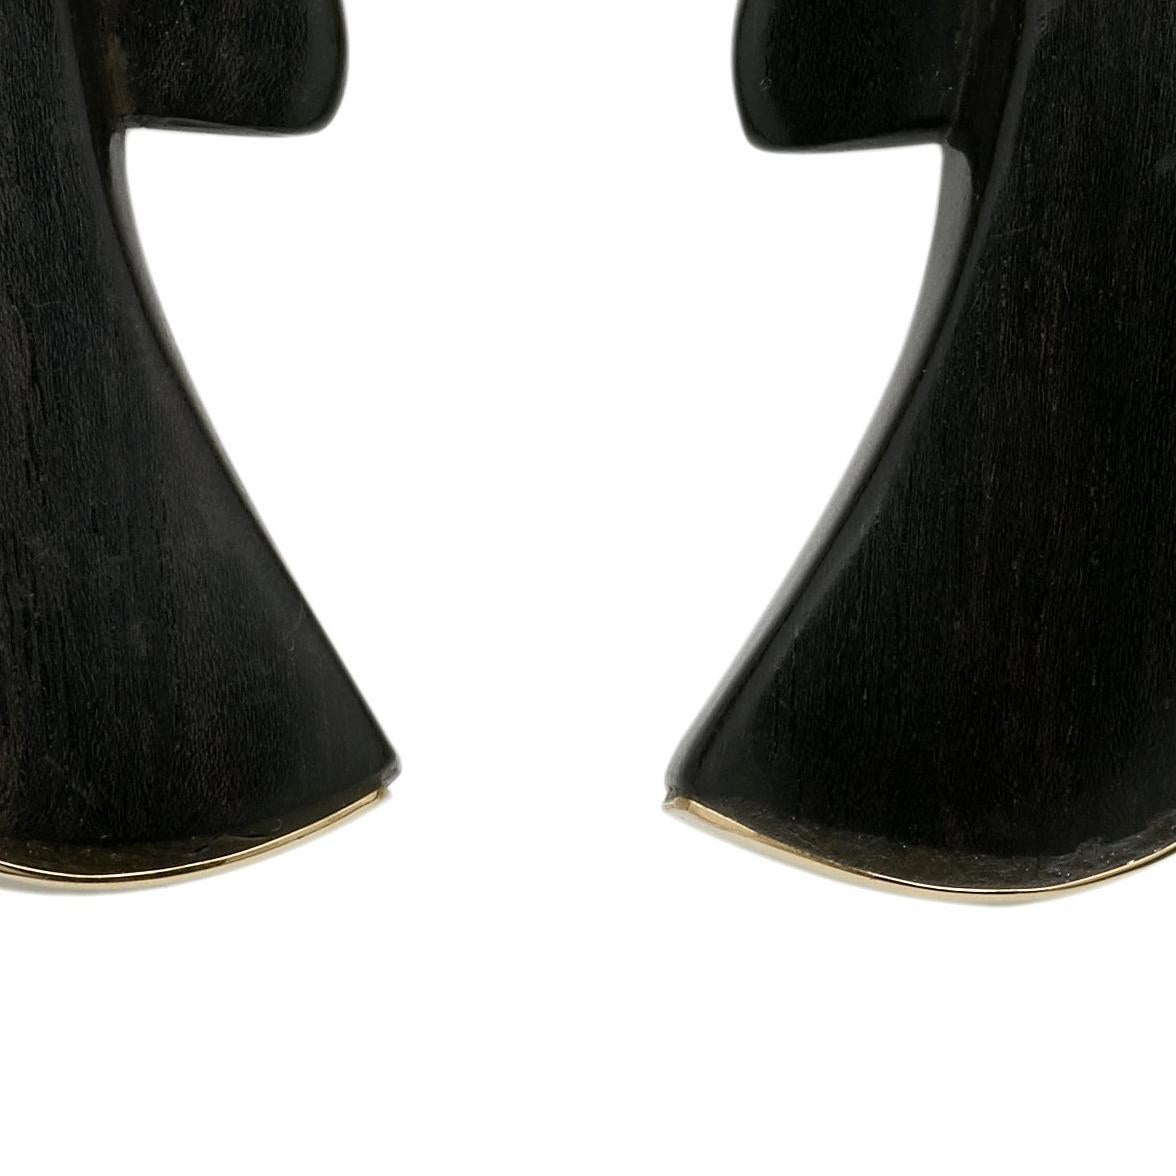 Earrings made of ebony and yellow gold